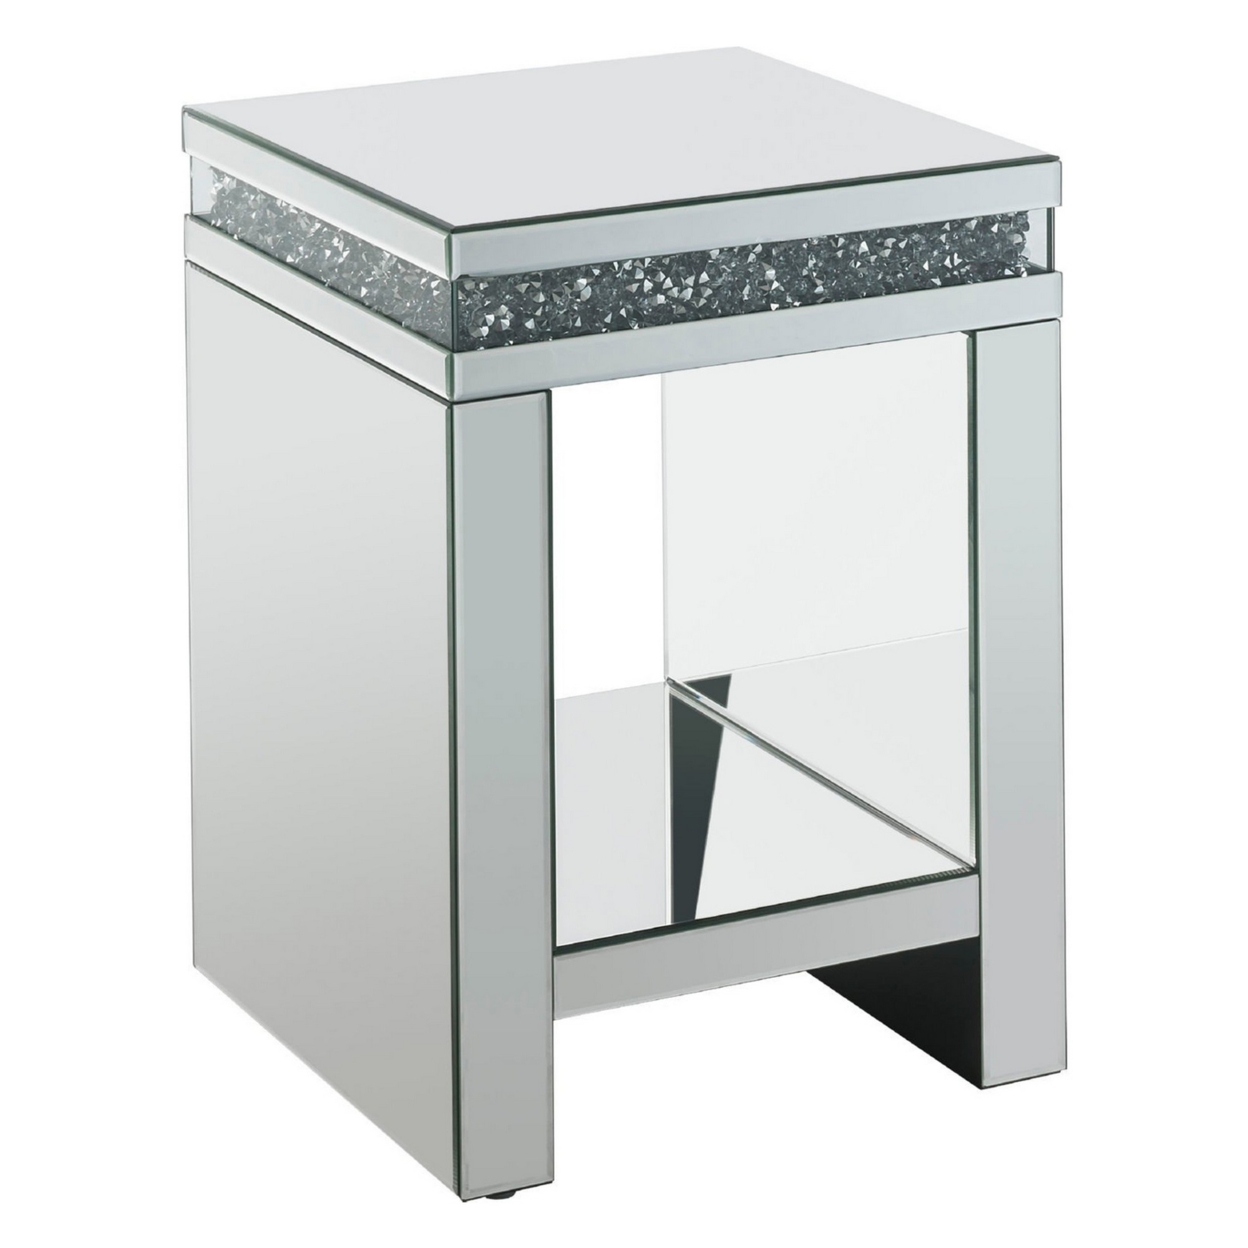 End Table With Faux Acrylic Diamond Inlay And 1 Lower Shelf, Silver- Saltoro Sherpi